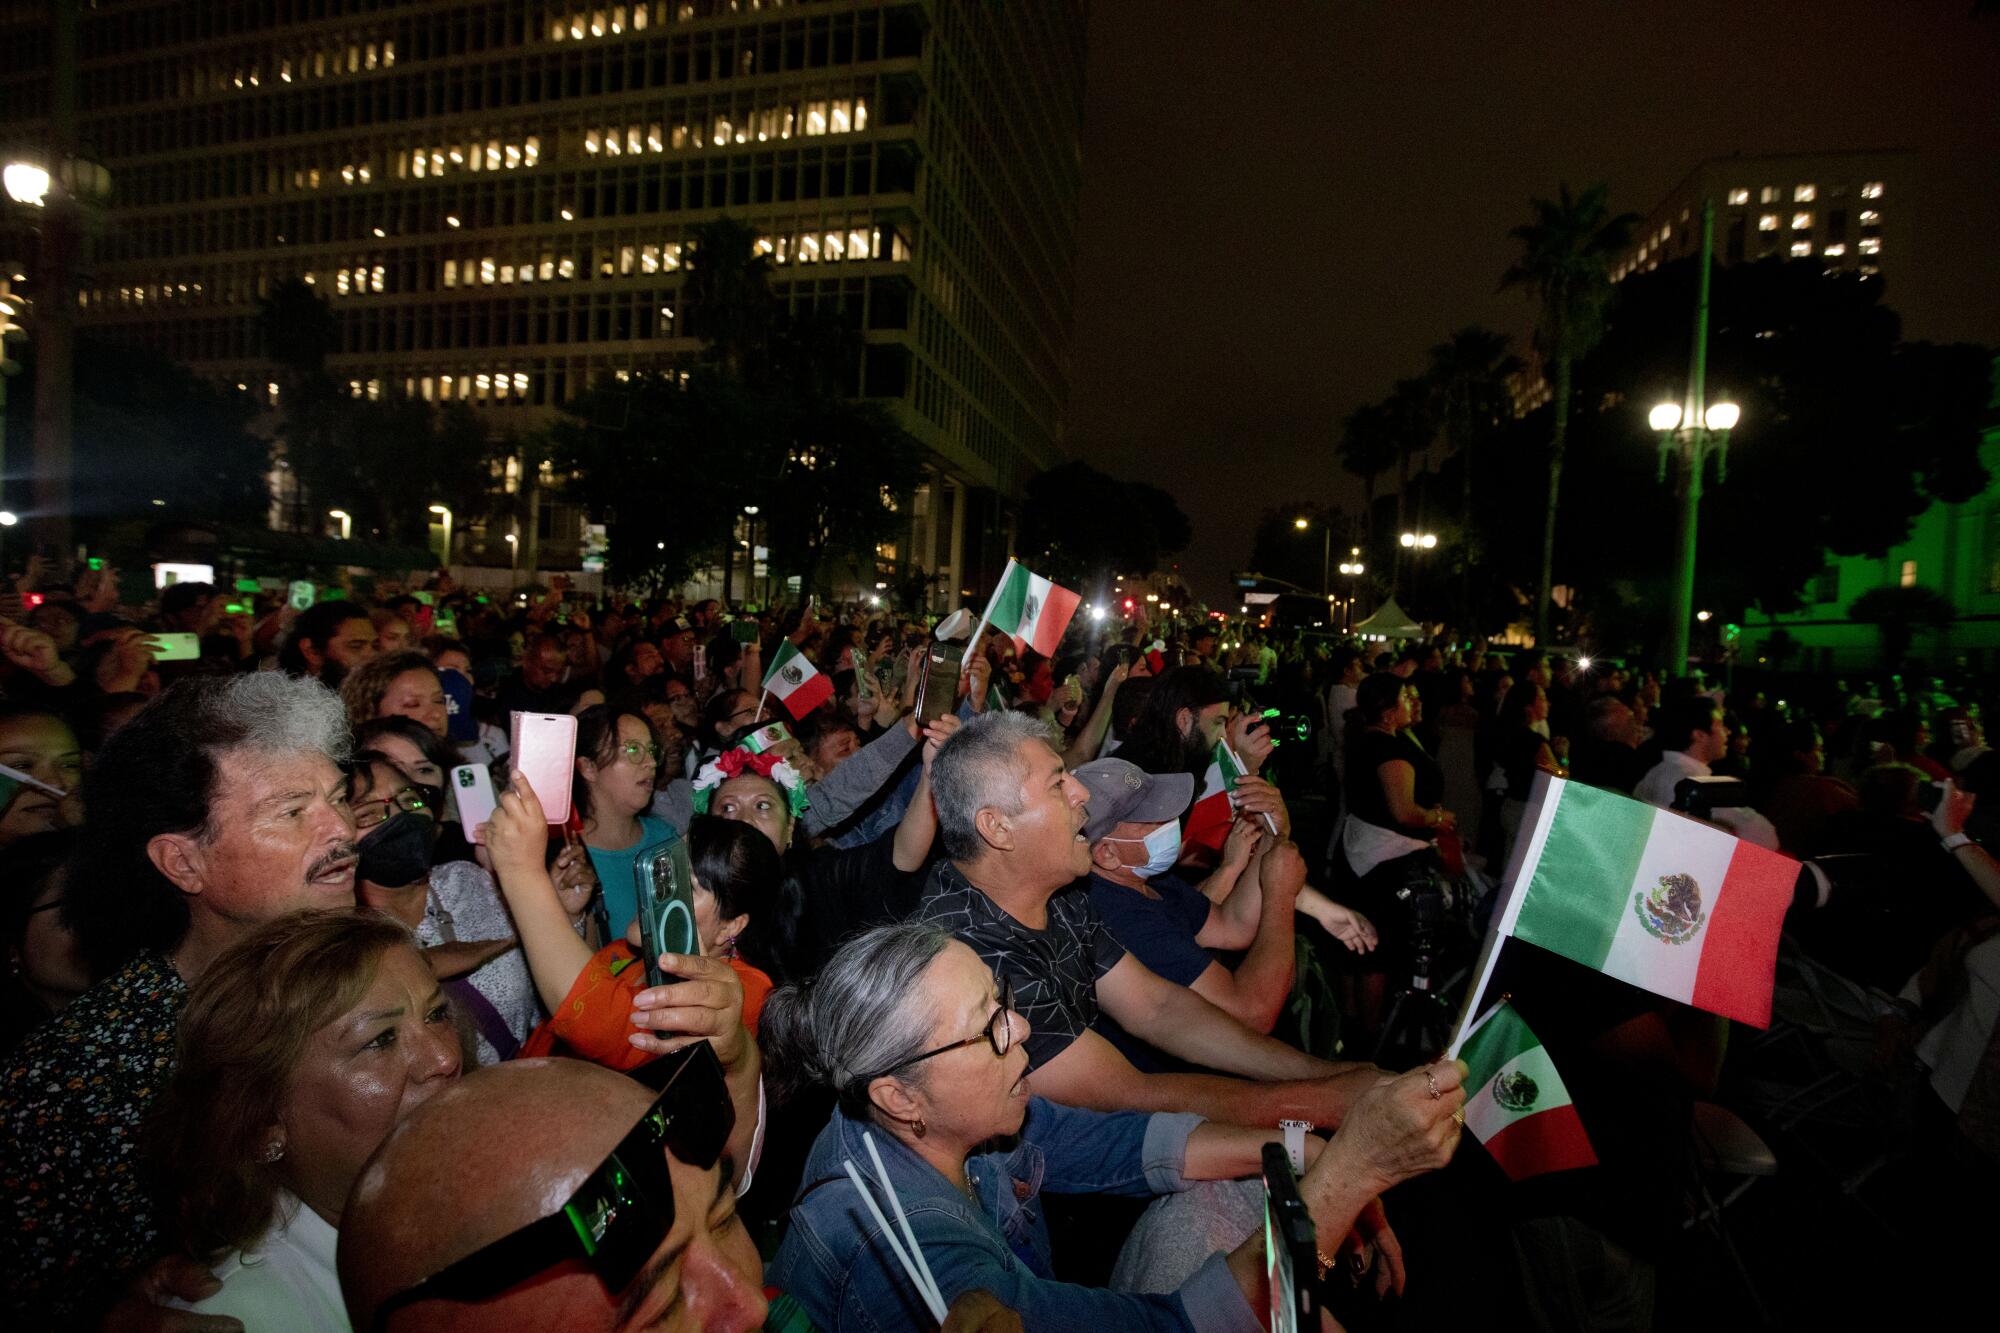 A group of people holding Mexican flags